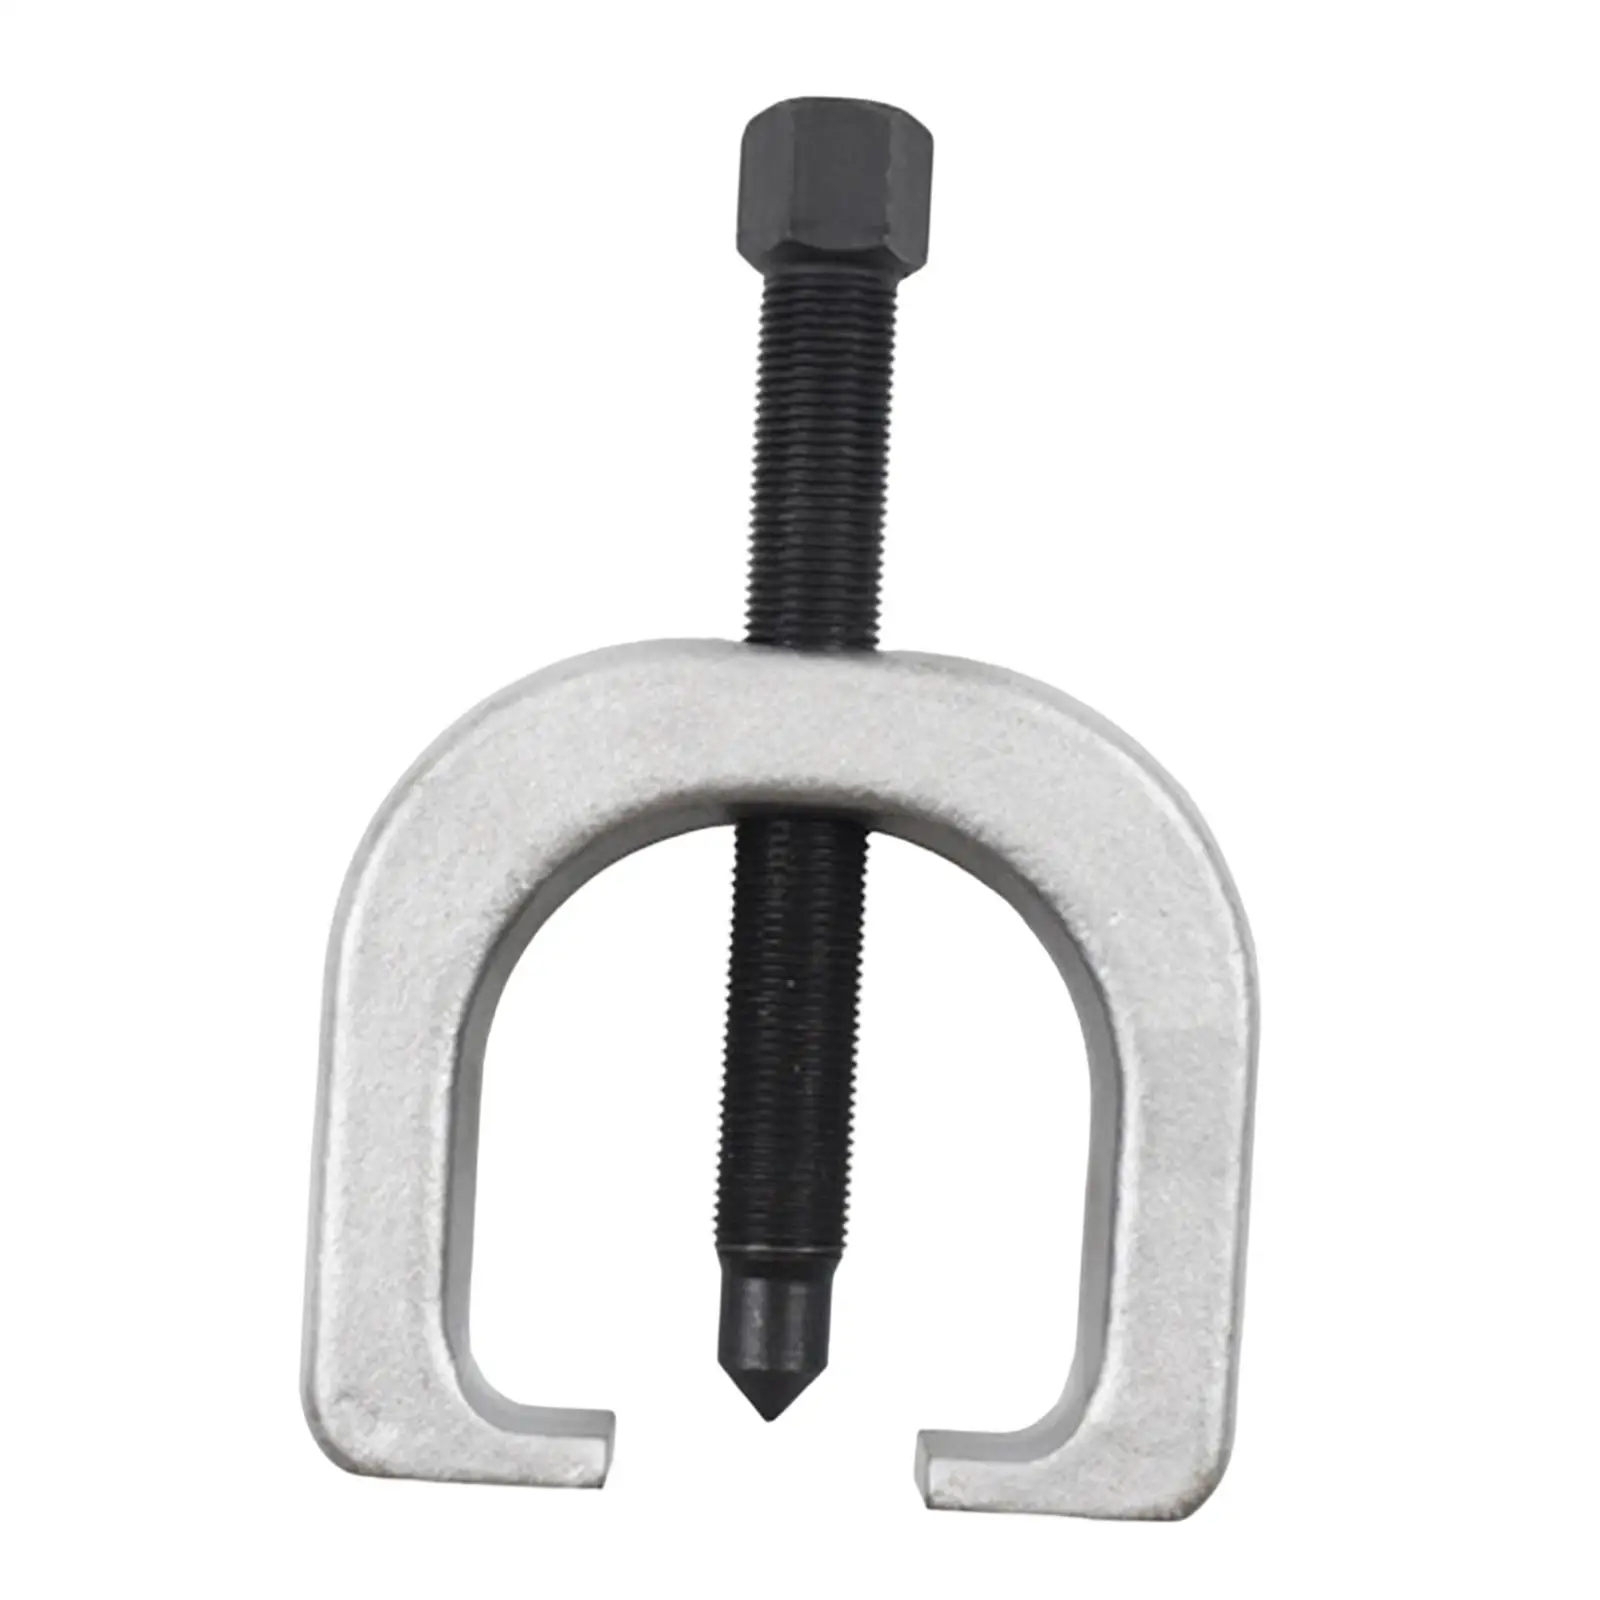 Slack Adjuster Puller Easy to Operate Compact Sturdy Professional Carbon Steel